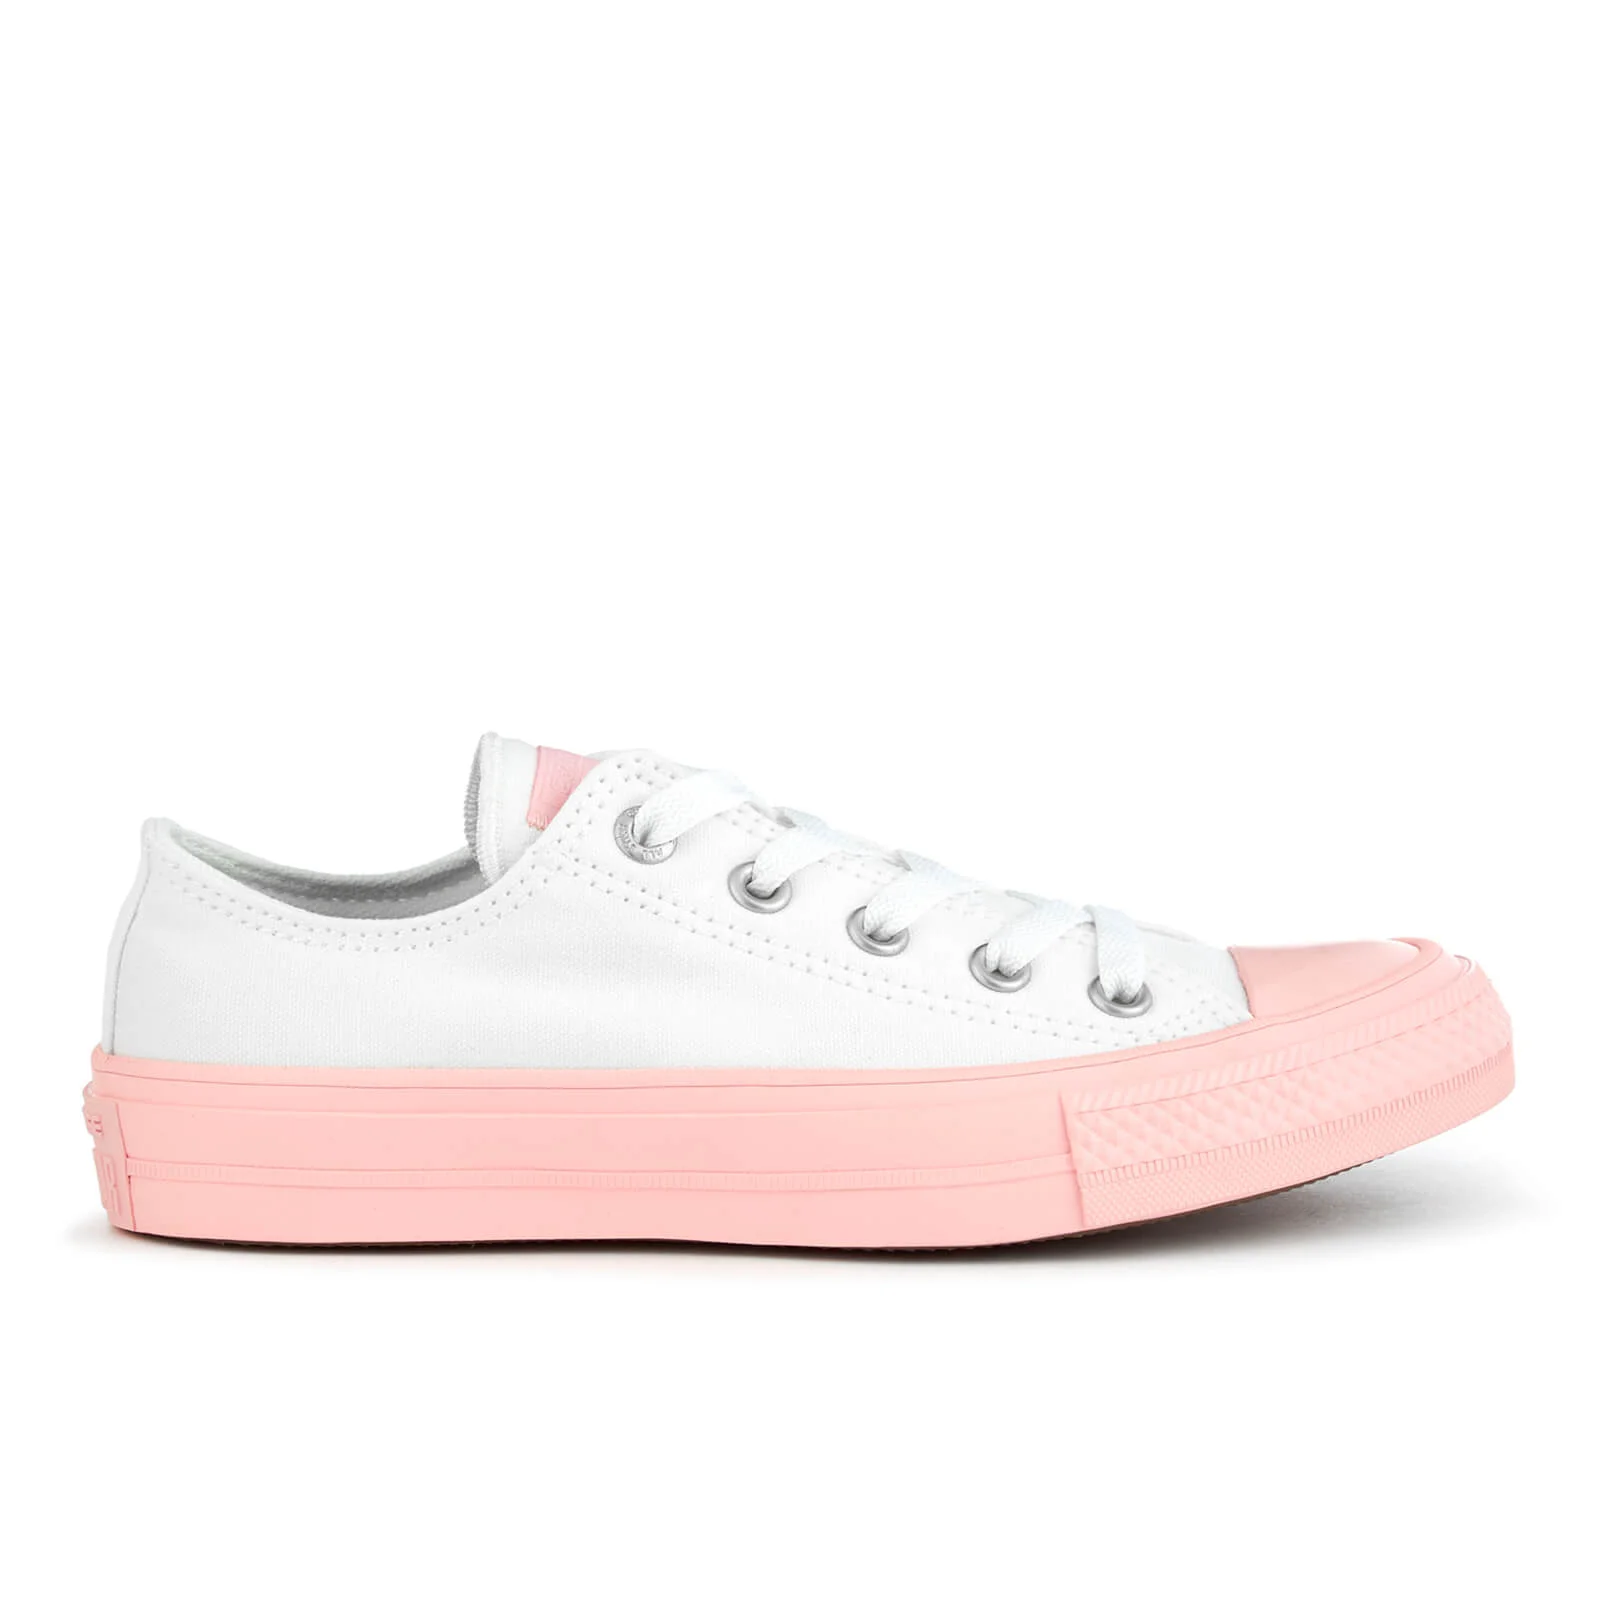 Converse Women's Chuck Taylor All Star II Ox Trainers - White/Vapor Pink Image 1